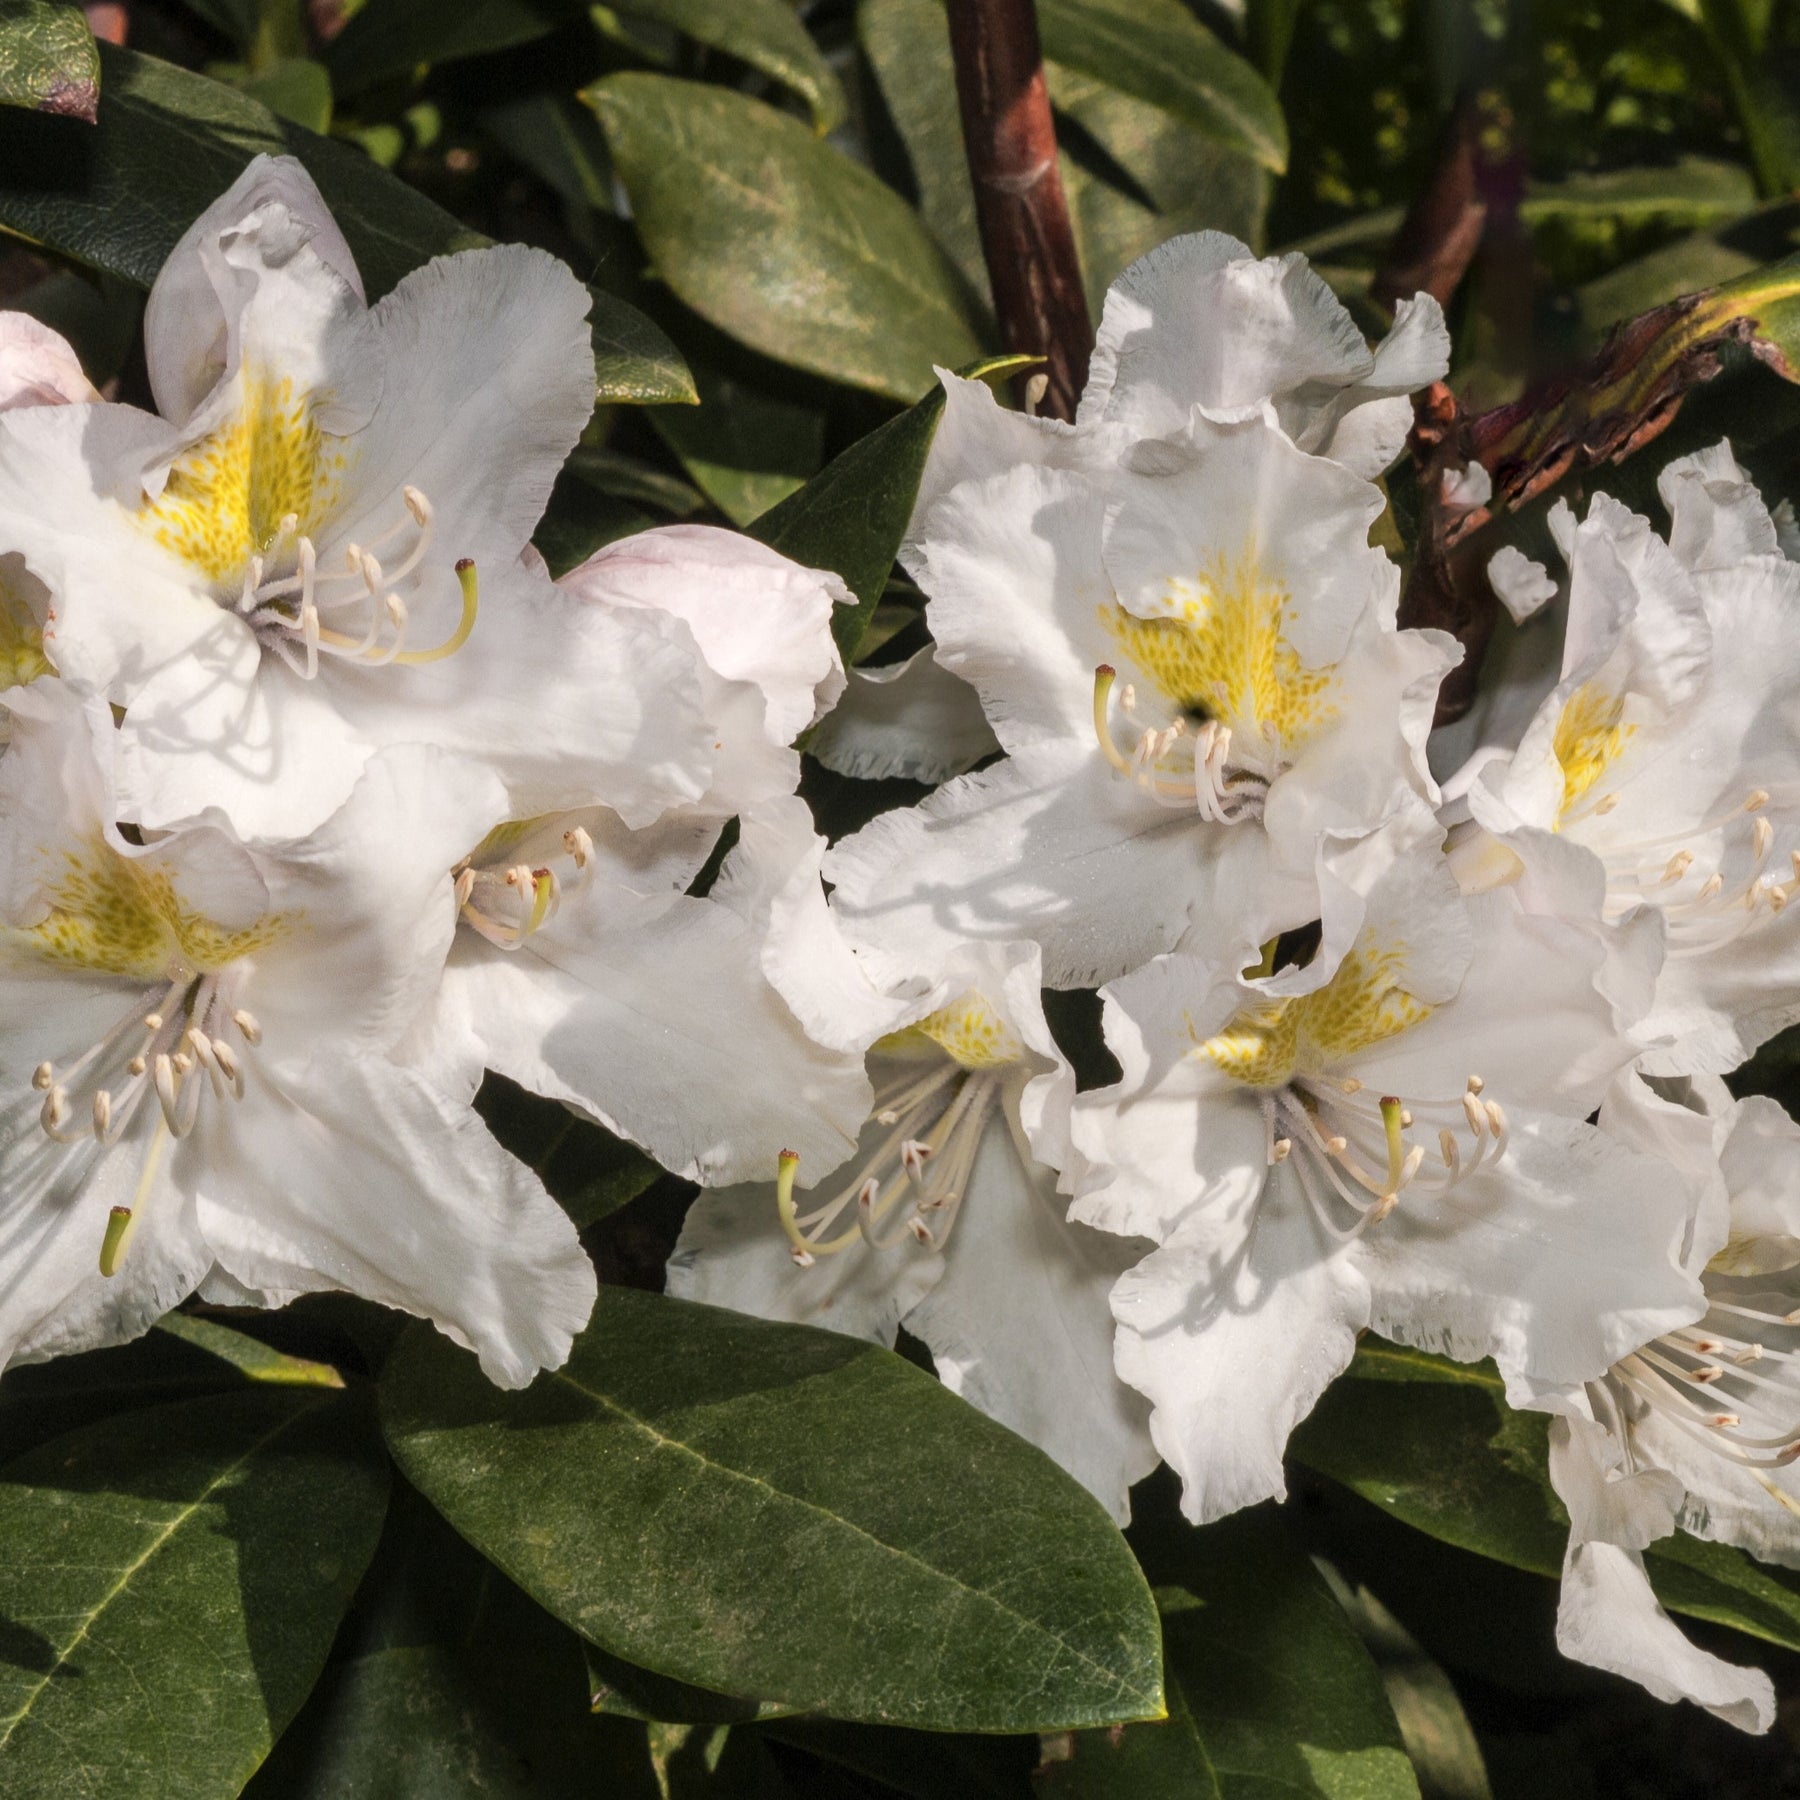 Rhododendron Cunningham's White - Rhododendron cunningham's white - Rhododendrons